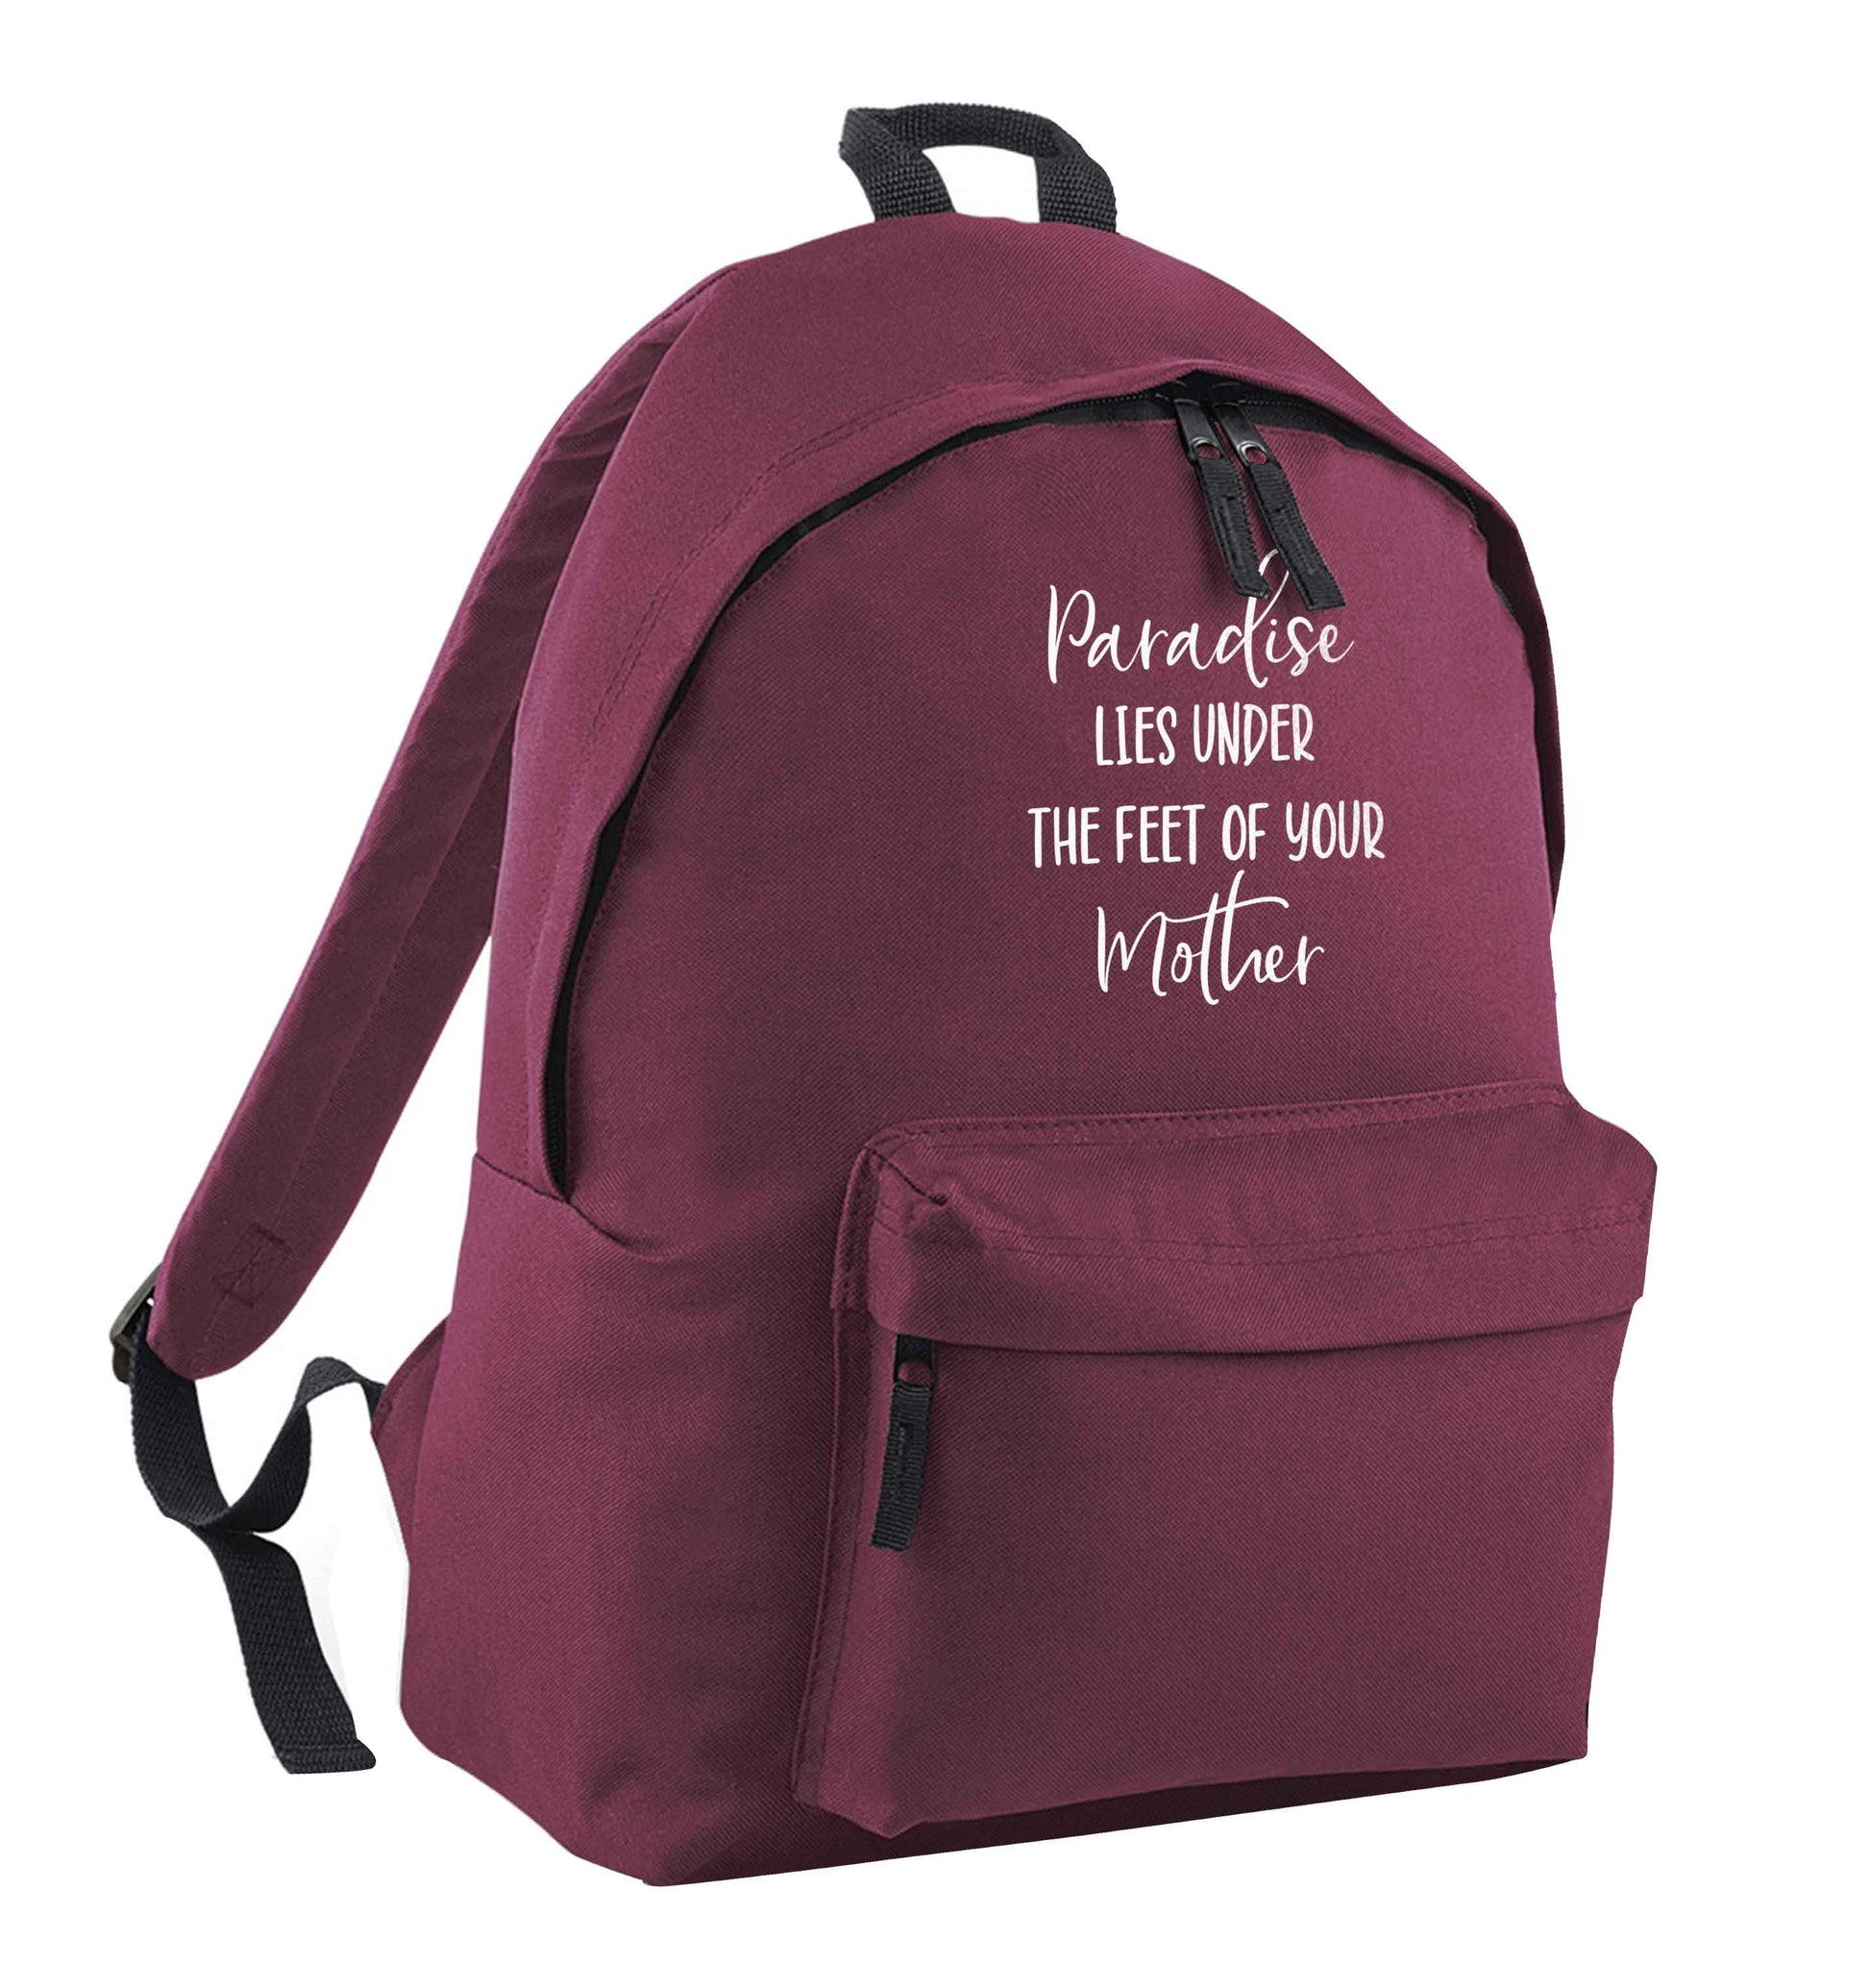 Paradise lies under the feet of your mother maroon adults backpack